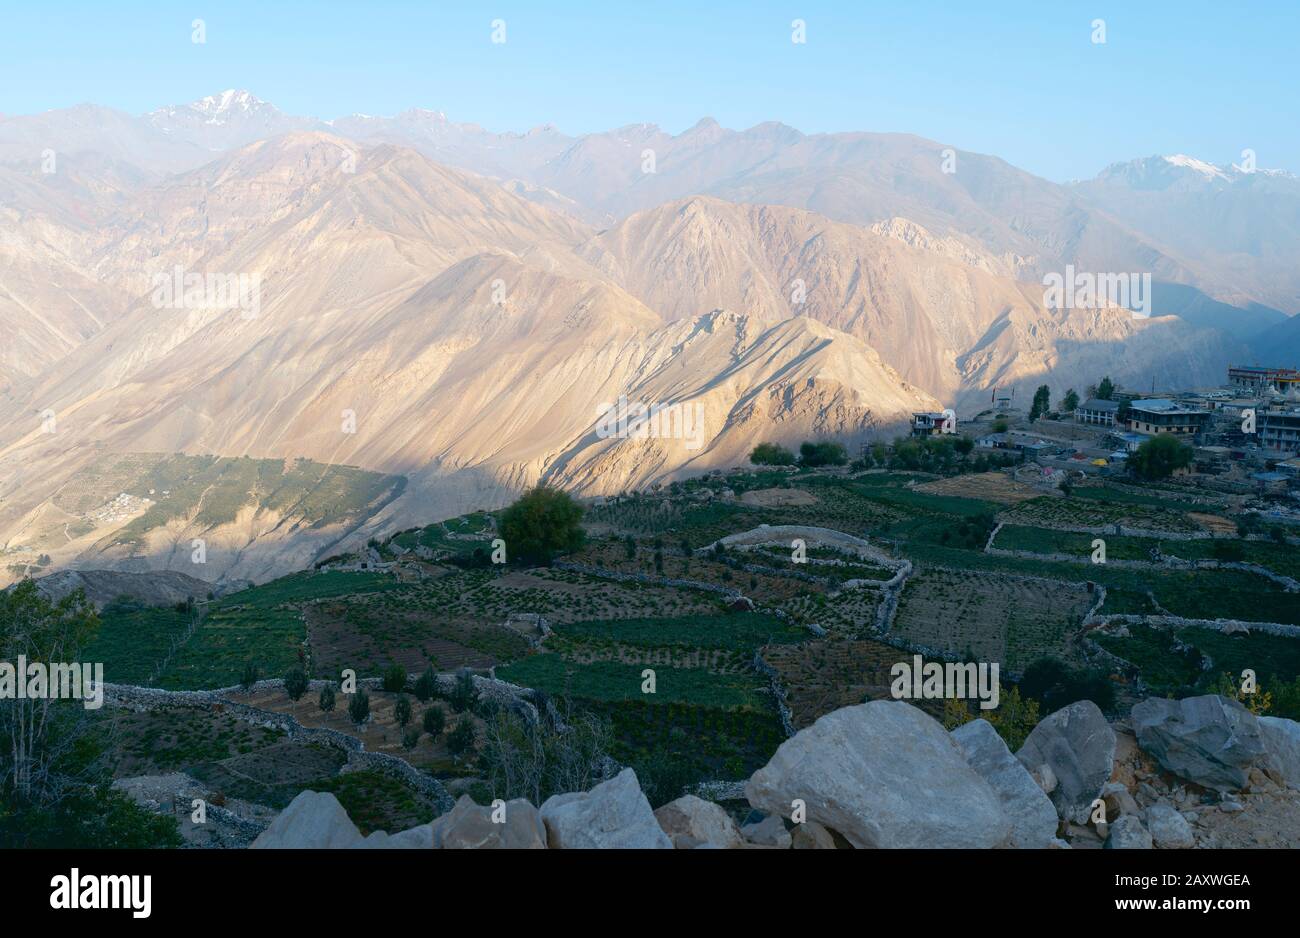 View of village agricultural fields with dry stone walls with rugged Himalayas in background on bright summer morning in Nako, Himachal Pradesh, India. Stock Photo